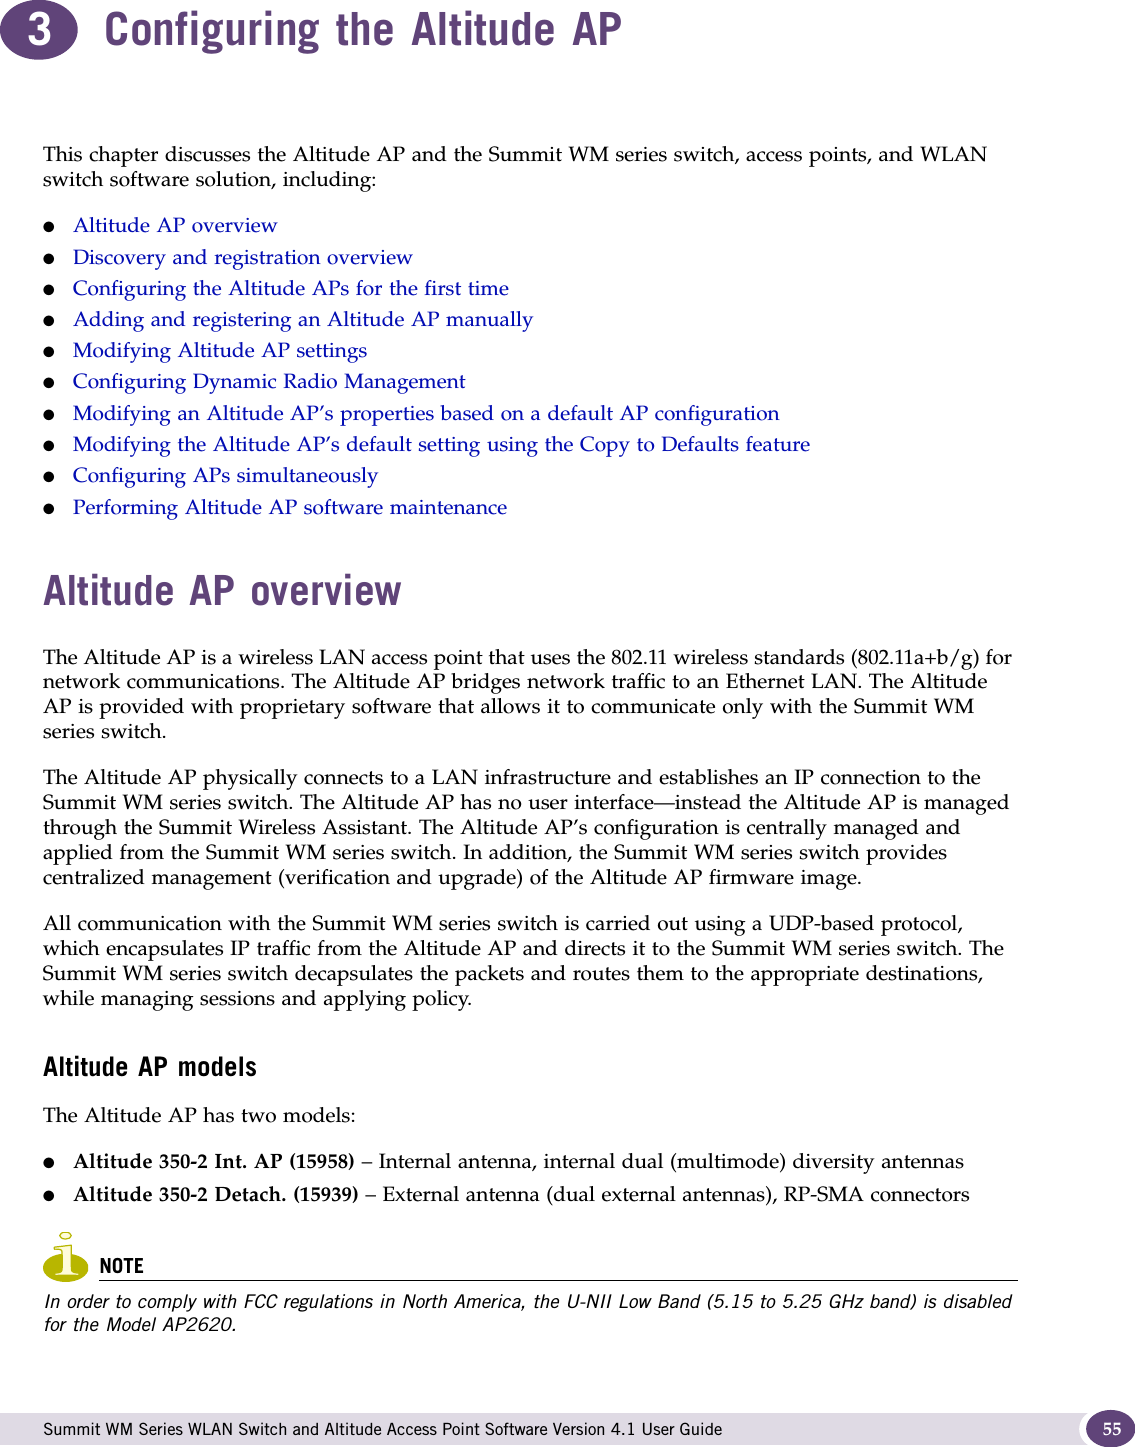  Summit WM Series WLAN Switch and Altitude Access Point Software Version 4.1 User Guide 553Configuring the Altitude APThis chapter discusses the Altitude AP and the Summit WM series switch, access points, and WLAN switch software solution, including:●Altitude AP overview●Discovery and registration overview●Configuring the Altitude APs for the first time●Adding and registering an Altitude AP manually●Modifying Altitude AP settings●Configuring Dynamic Radio Management●Modifying an Altitude AP’s properties based on a default AP configuration●Modifying the Altitude AP’s default setting using the Copy to Defaults feature●Configuring APs simultaneously●Performing Altitude AP software maintenanceAltitude AP overviewThe Altitude AP is a wireless LAN access point that uses the 802.11 wireless standards (802.11a+b/g) for network communications. The Altitude AP bridges network traffic to an Ethernet LAN. The Altitude AP is provided with proprietary software that allows it to communicate only with the Summit WM series switch. The Altitude AP physically connects to a LAN infrastructure and establishes an IP connection to the Summit WM series switch. The Altitude AP has no user interface—instead the Altitude AP is managed through the Summit Wireless Assistant. The Altitude AP’s configuration is centrally managed and applied from the Summit WM series switch. In addition, the Summit WM series switch provides centralized management (verification and upgrade) of the Altitude AP firmware image. All communication with the Summit WM series switch is carried out using a UDP-based protocol, which encapsulates IP traffic from the Altitude AP and directs it to the Summit WM series switch. The Summit WM series switch decapsulates the packets and routes them to the appropriate destinations, while managing sessions and applying policy.Altitude AP modelsThe Altitude AP has two models:●Altitude 350-2 Int. AP (15958) – Internal antenna, internal dual (multimode) diversity antennas●Altitude 350-2 Detach. (15939) – External antenna (dual external antennas), RP-SMA connectorsNOTEIn order to comply with FCC regulations in North America, the U-NII Low Band (5.15 to 5.25 GHz band) is disabled for the Model AP2620.